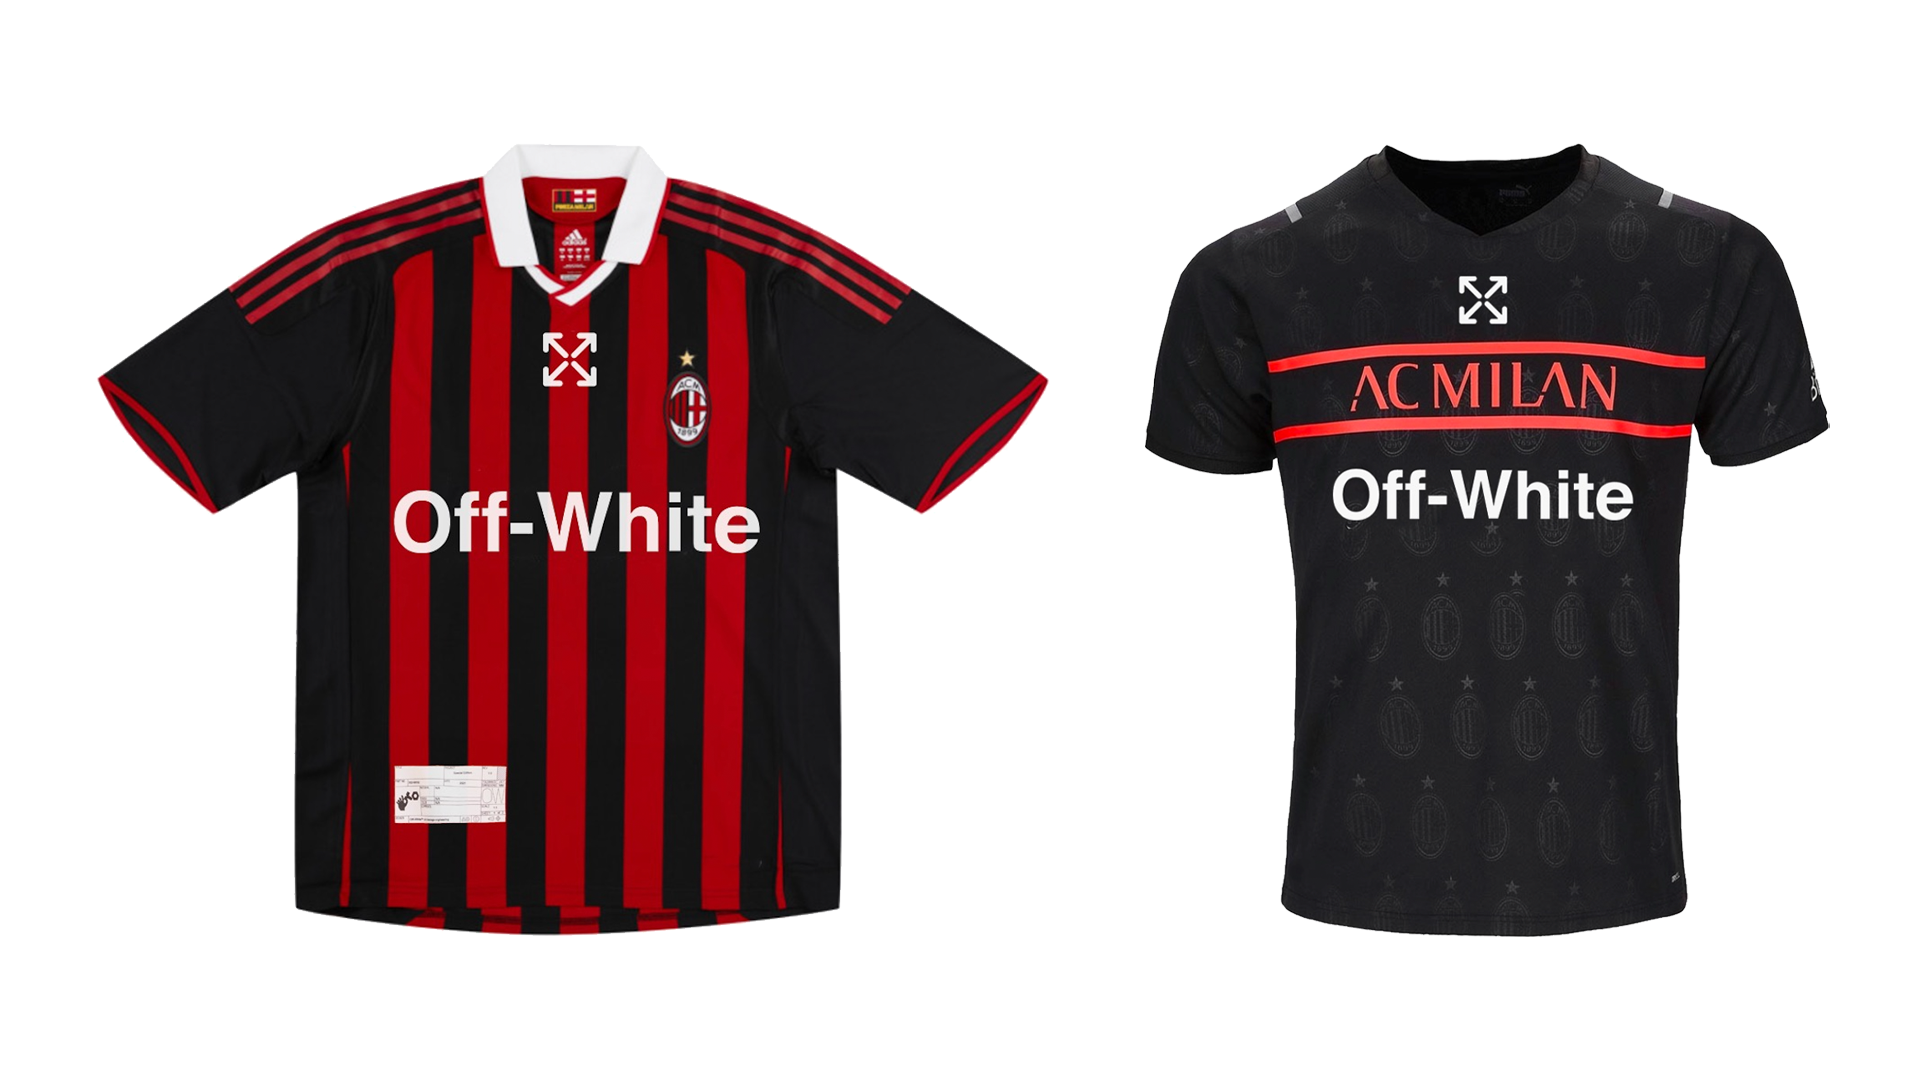 Off-White Rumoured to Team Up with AC Milan for Football Collection - SLN  Official